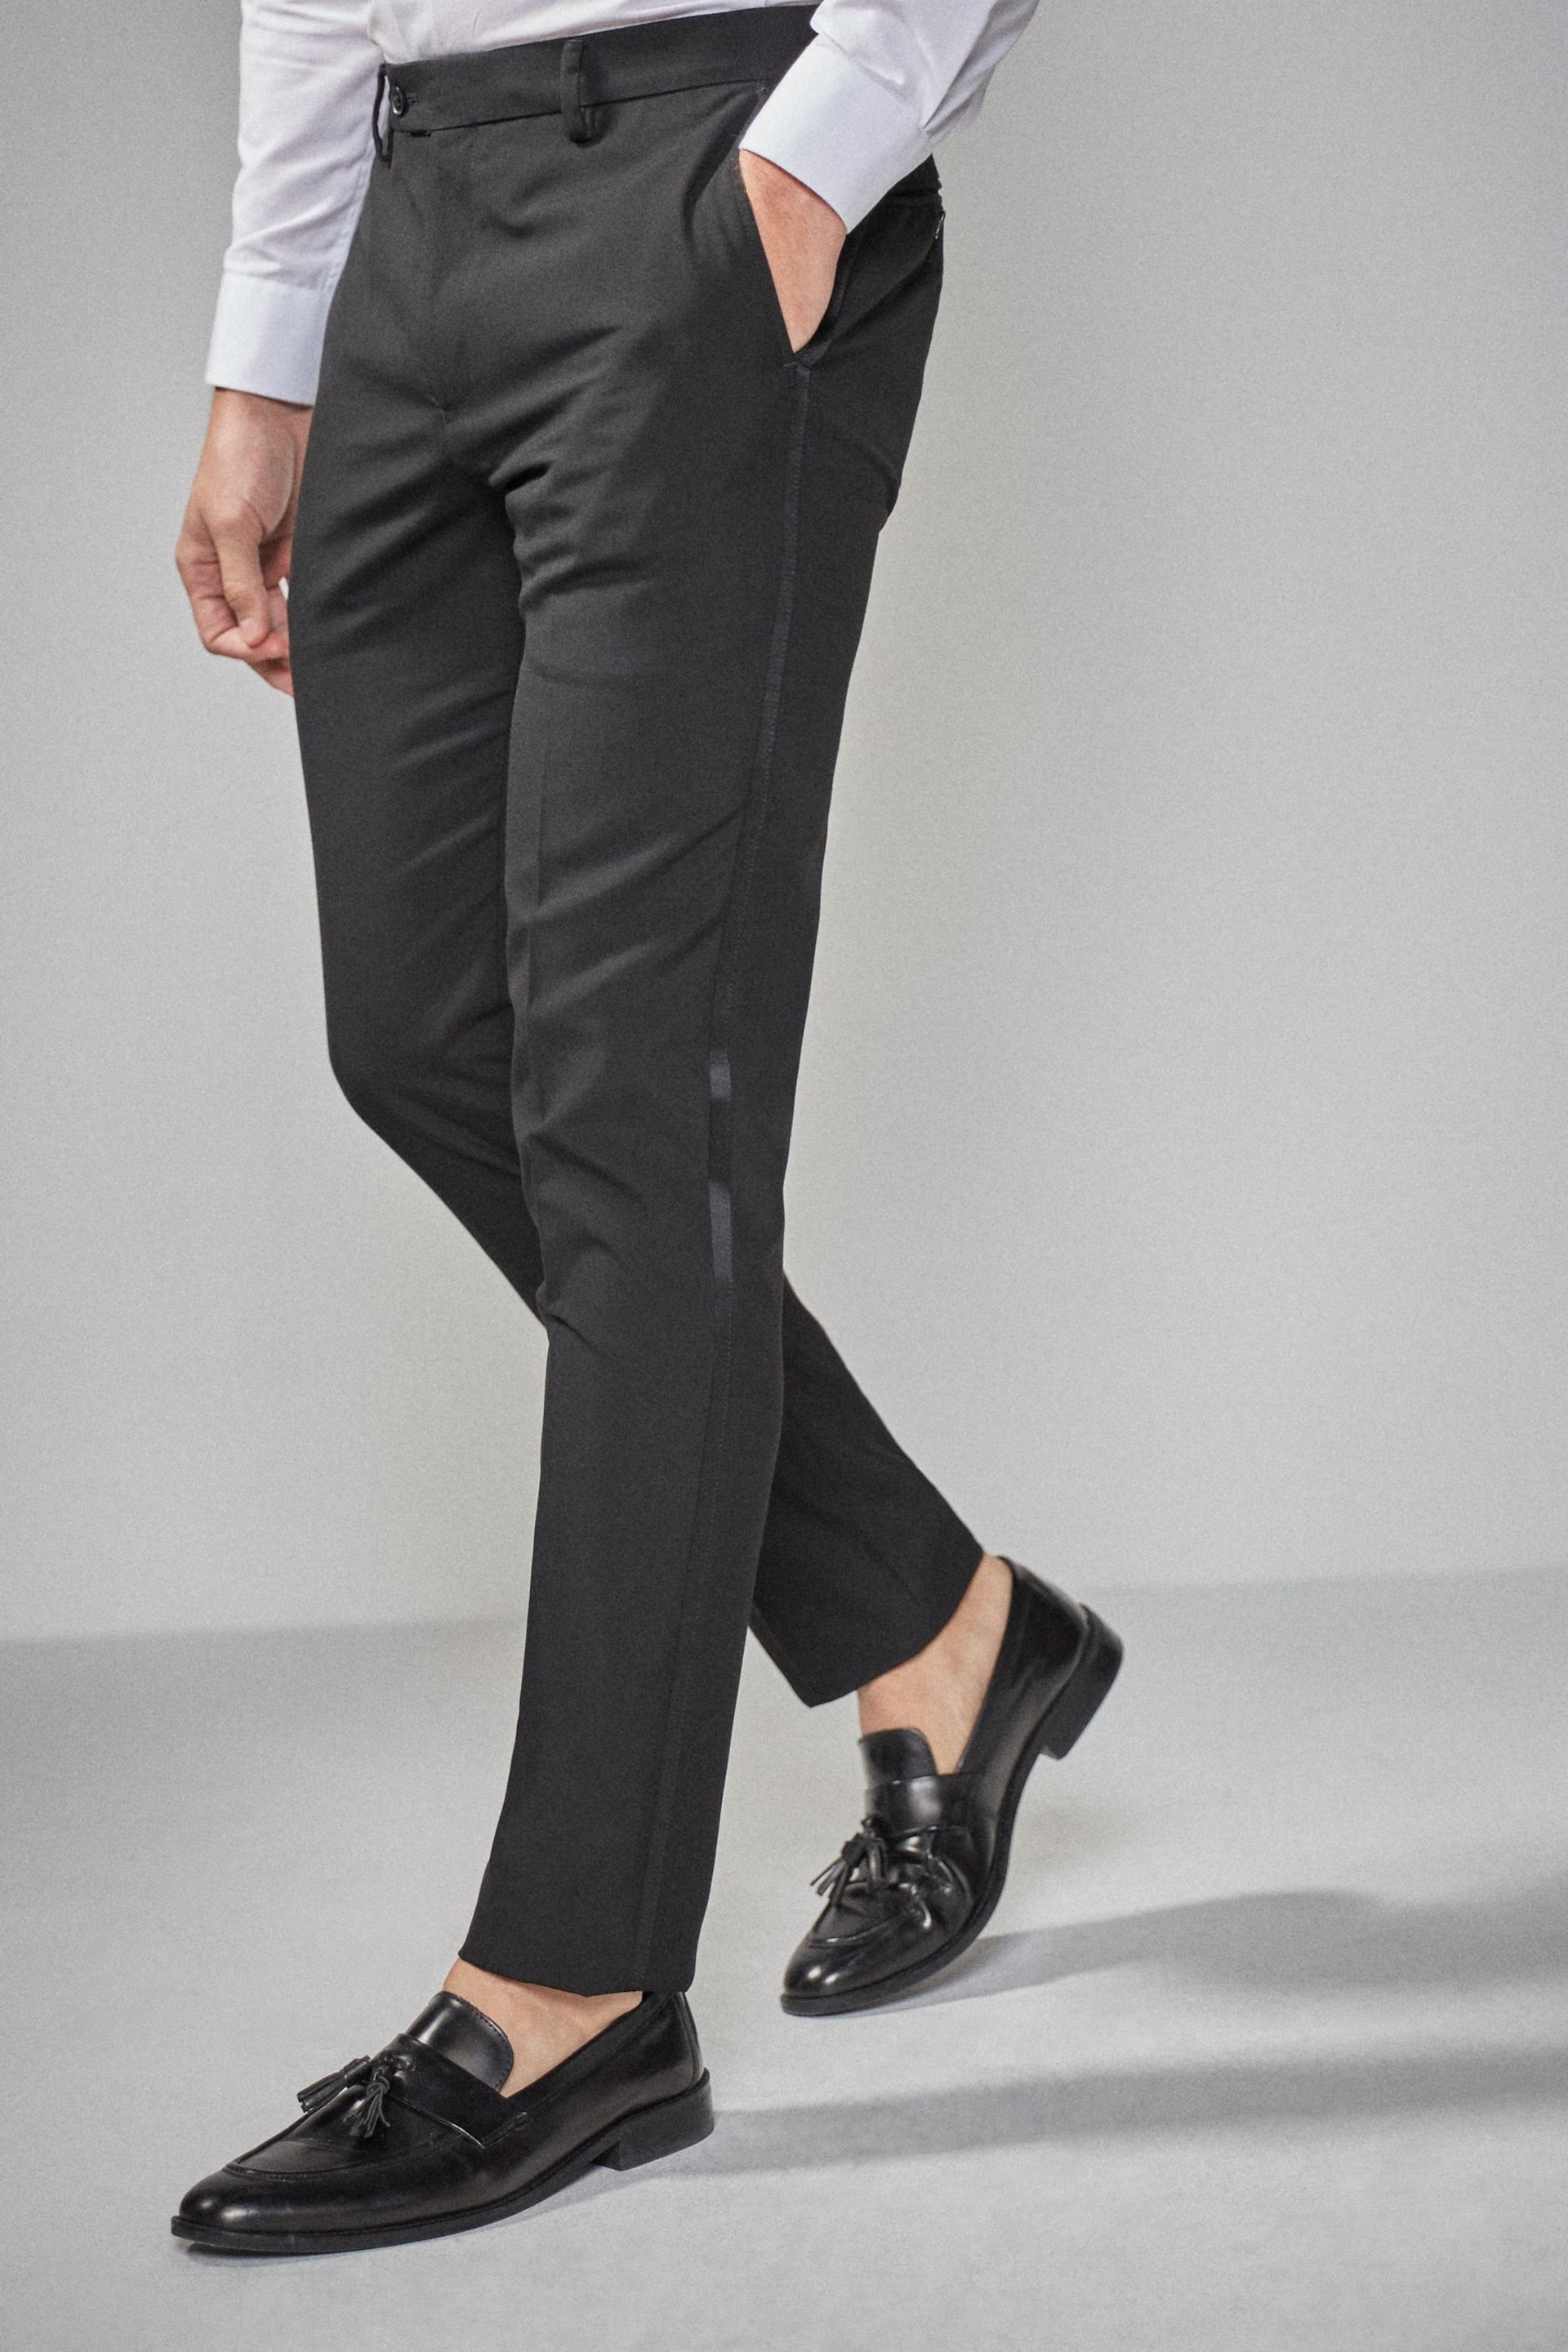 Dark Black Skinny Fit Tuxedo Suit Trousers with Tape Detail - Image 1 of 7